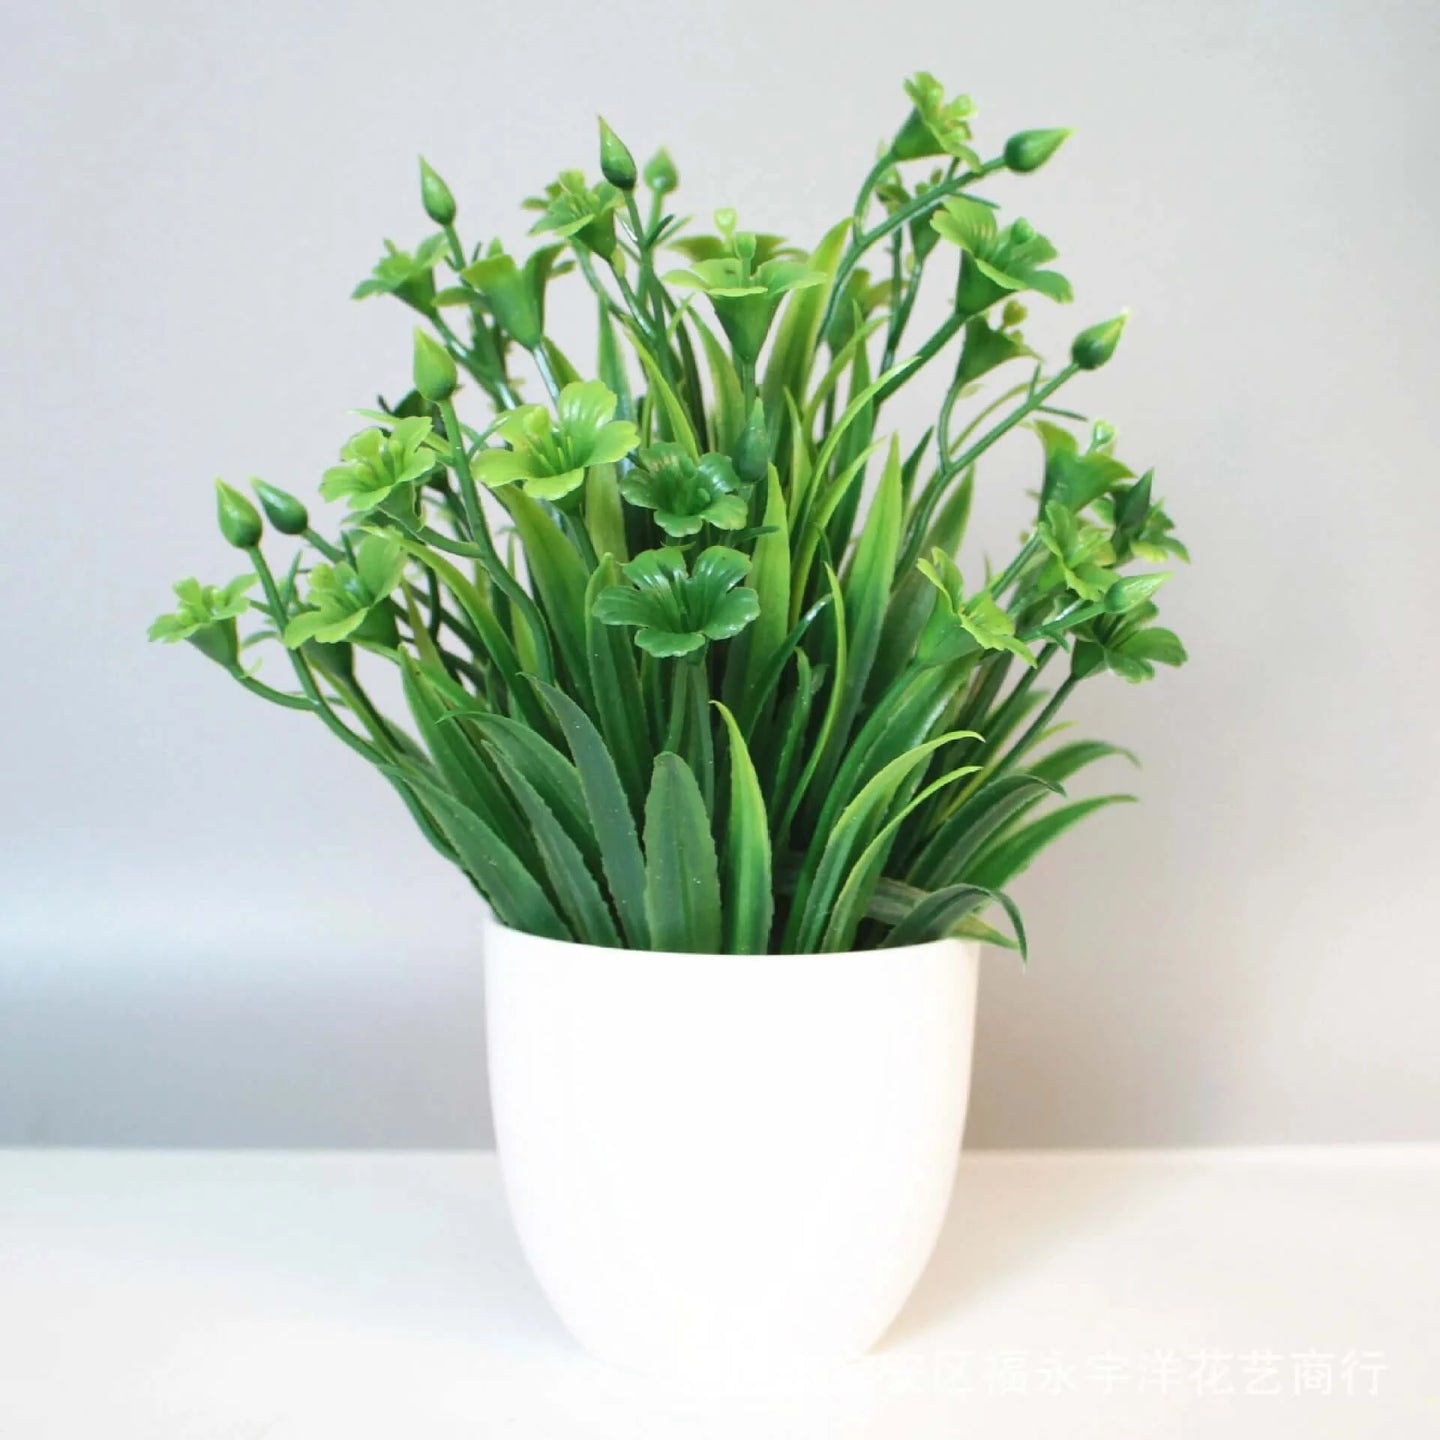 Eternal Elegance: Artificial Potted Plant for Stylish Home and Office Decor econXpress